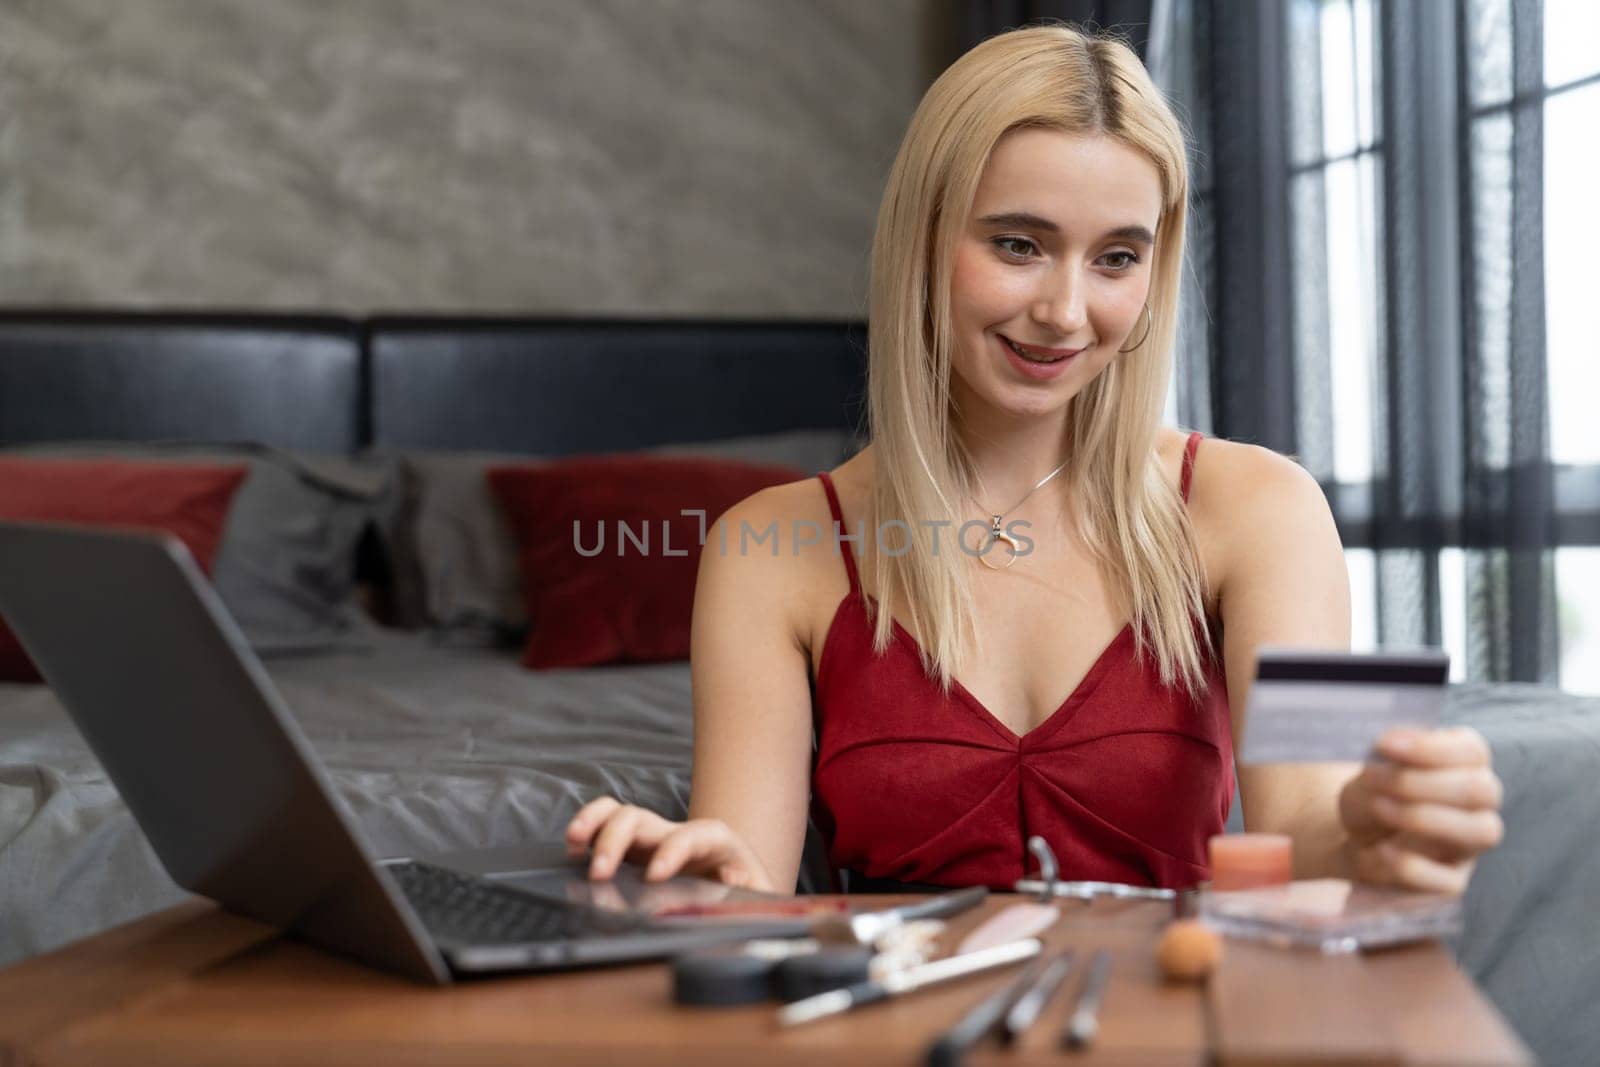 Young woman using laptop with credit card for internet banking, online shopping E commerce by online payment gateway at home office. Modern and convenience online purchasing with debit card. Blithe